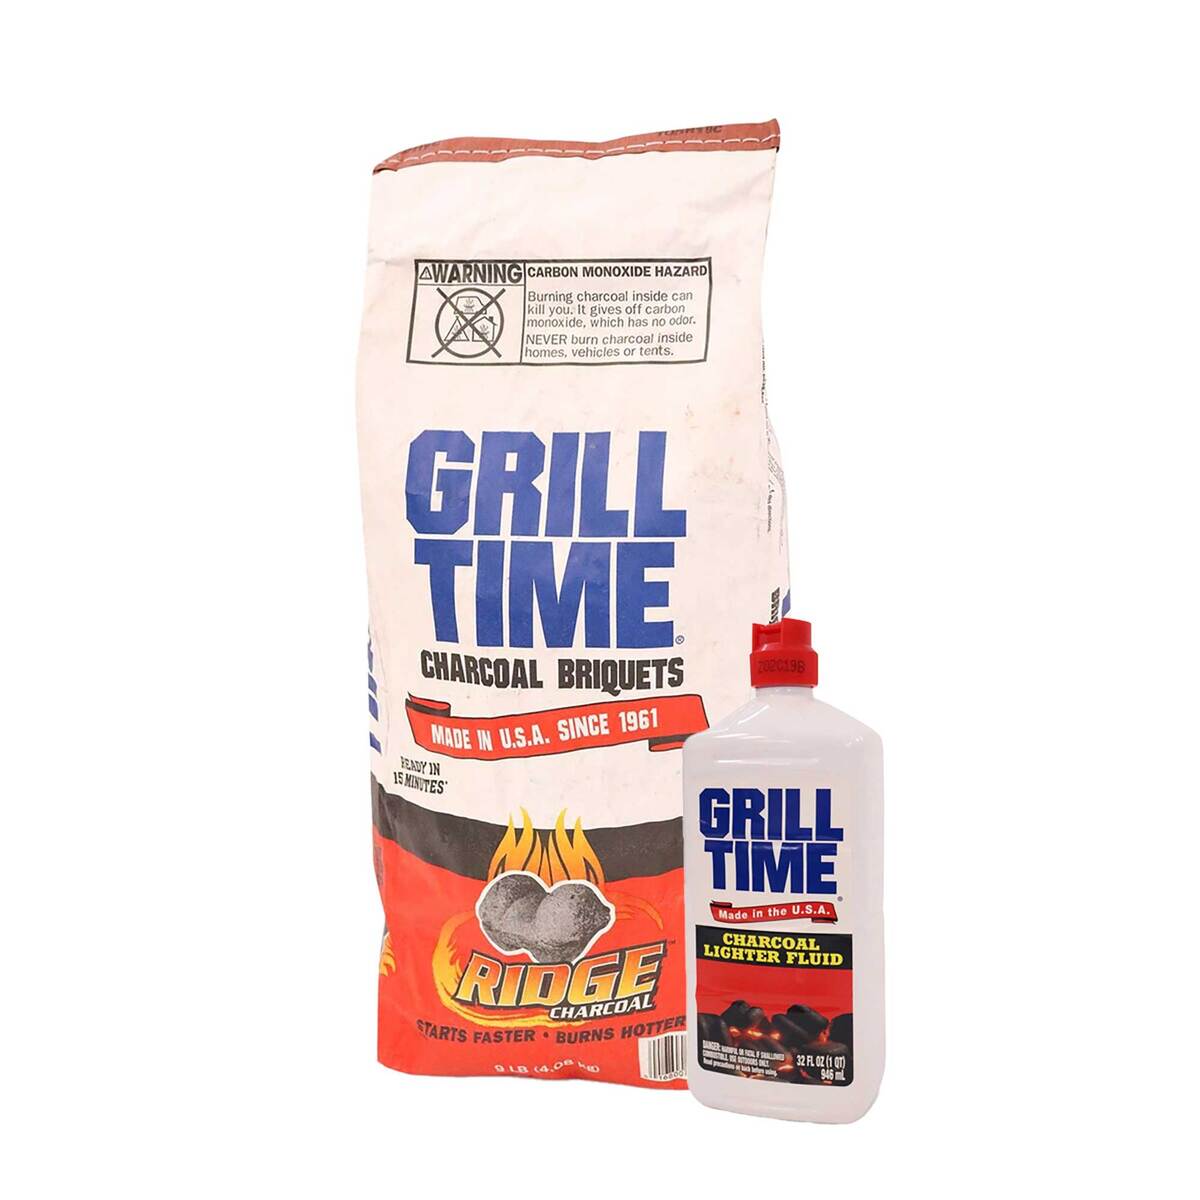 Grill Time Charcoal Briquets 4.08kg + Grill Time Charcoal Lighter Fluid 946ml